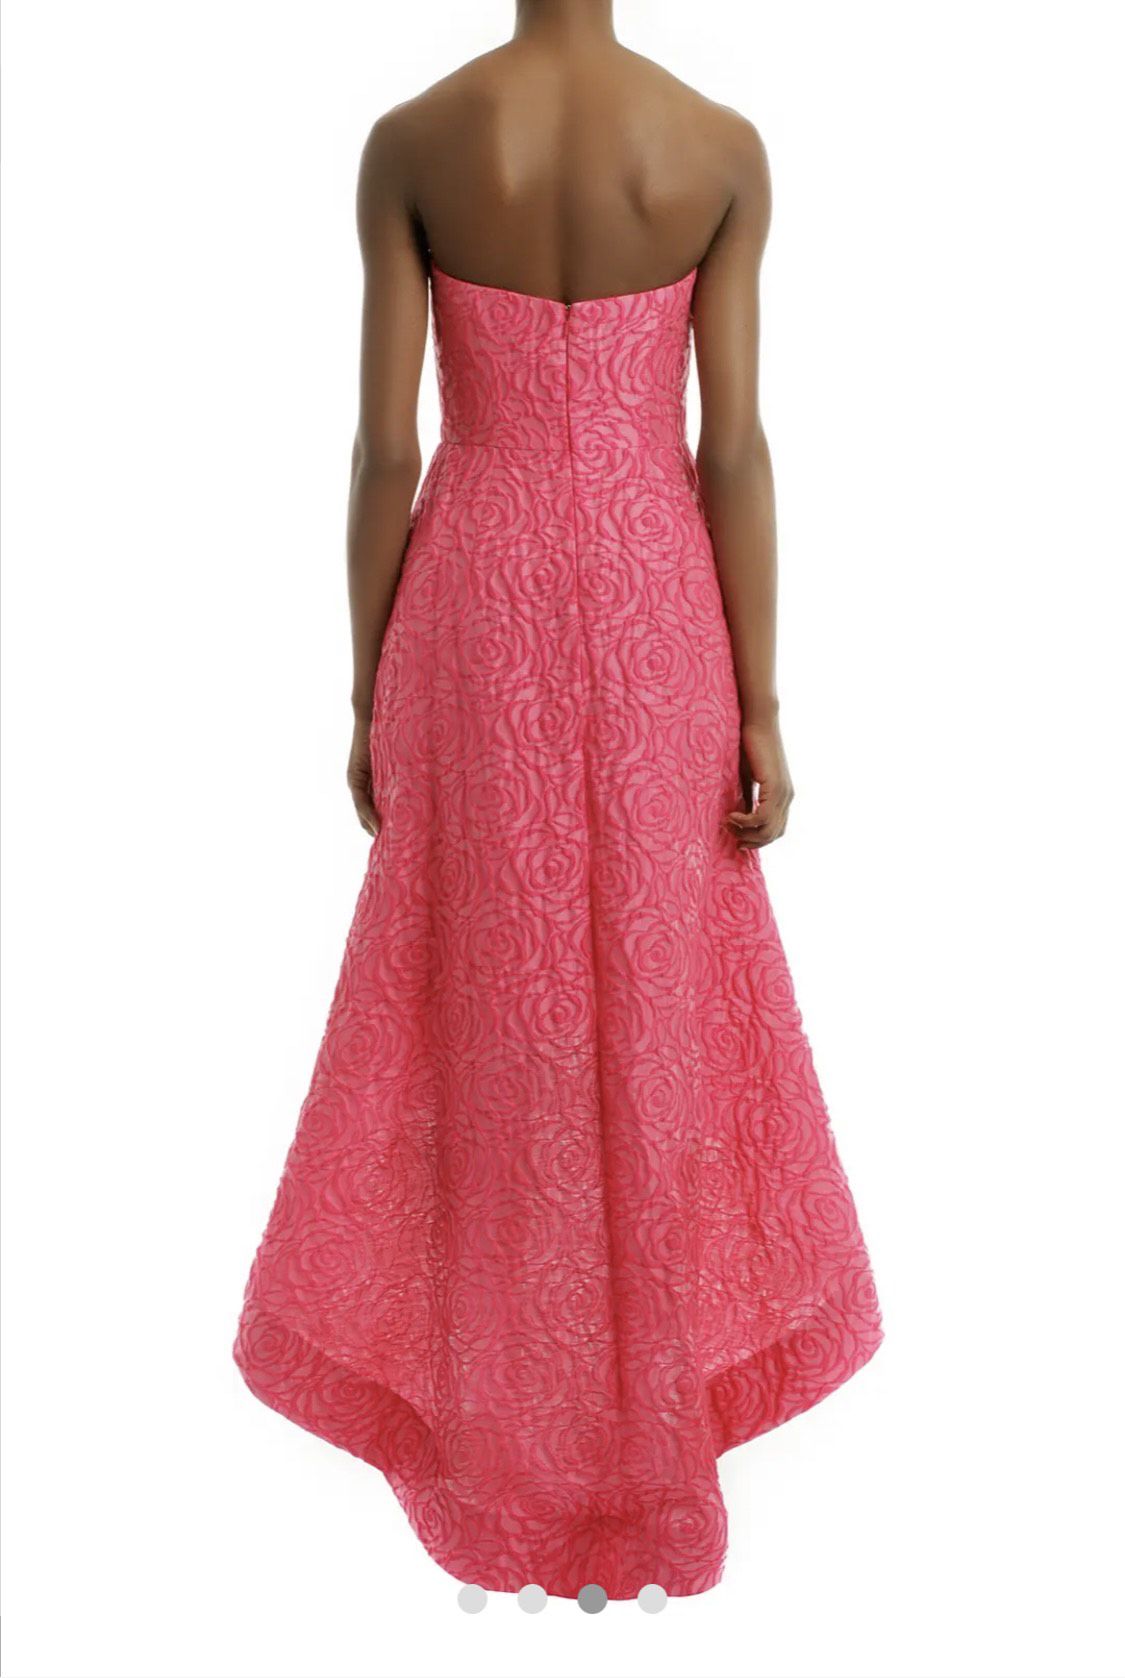 Monique L’huiller Size 6 Prom Strapless Pink A-line Dress on Queenly